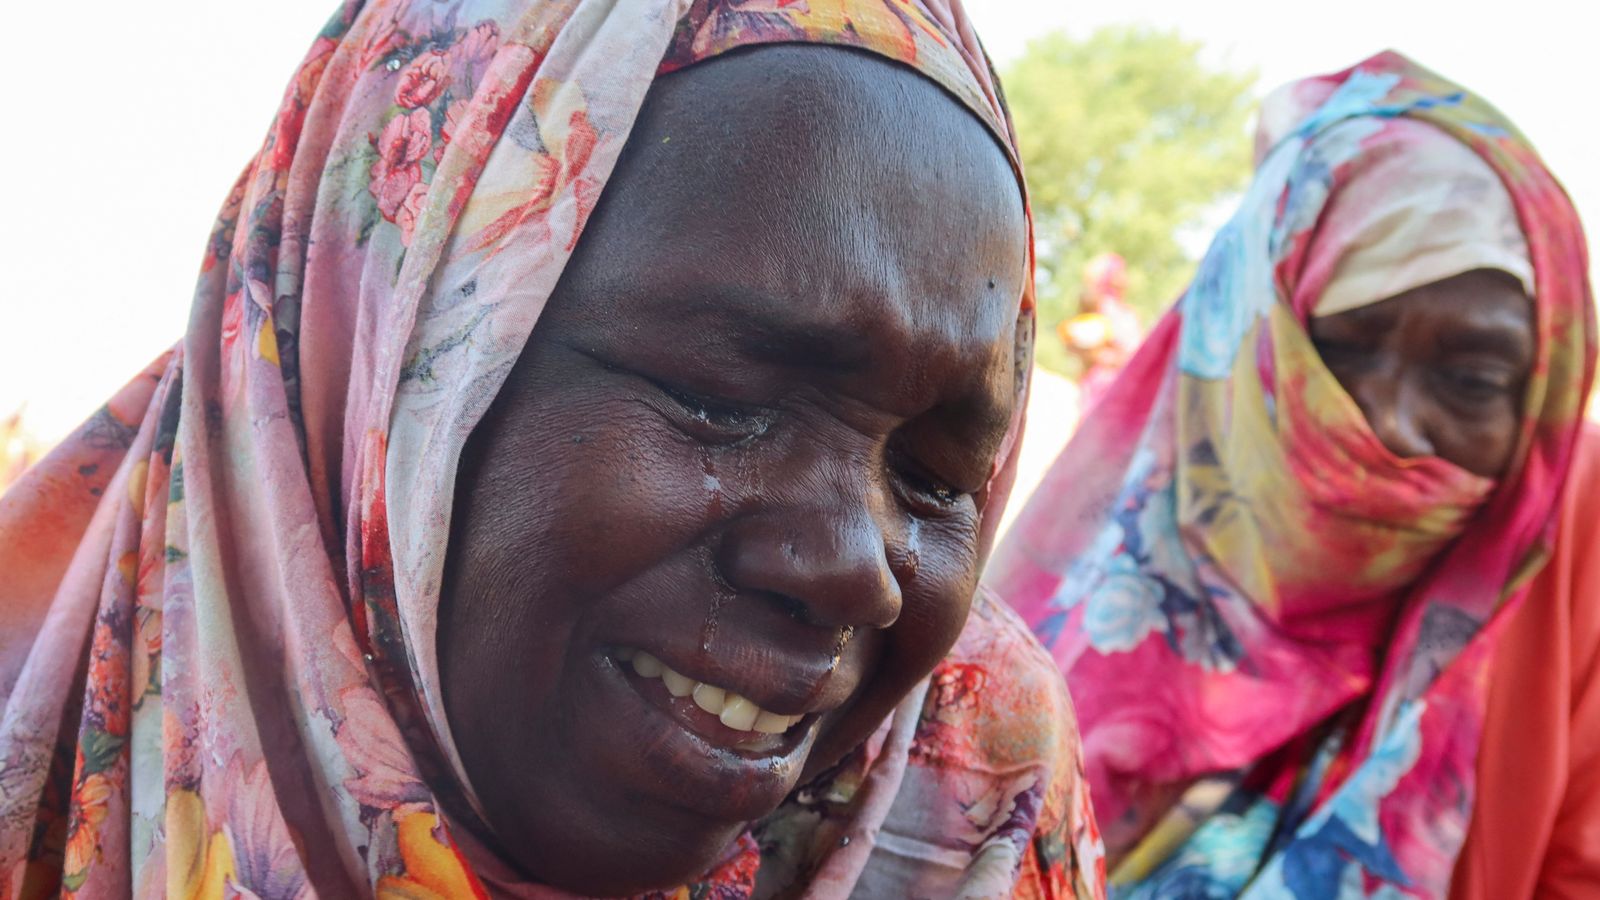 Army bases fall to RSF in Sudan forcing thousands to flee - as harrowing details of sieges emerge